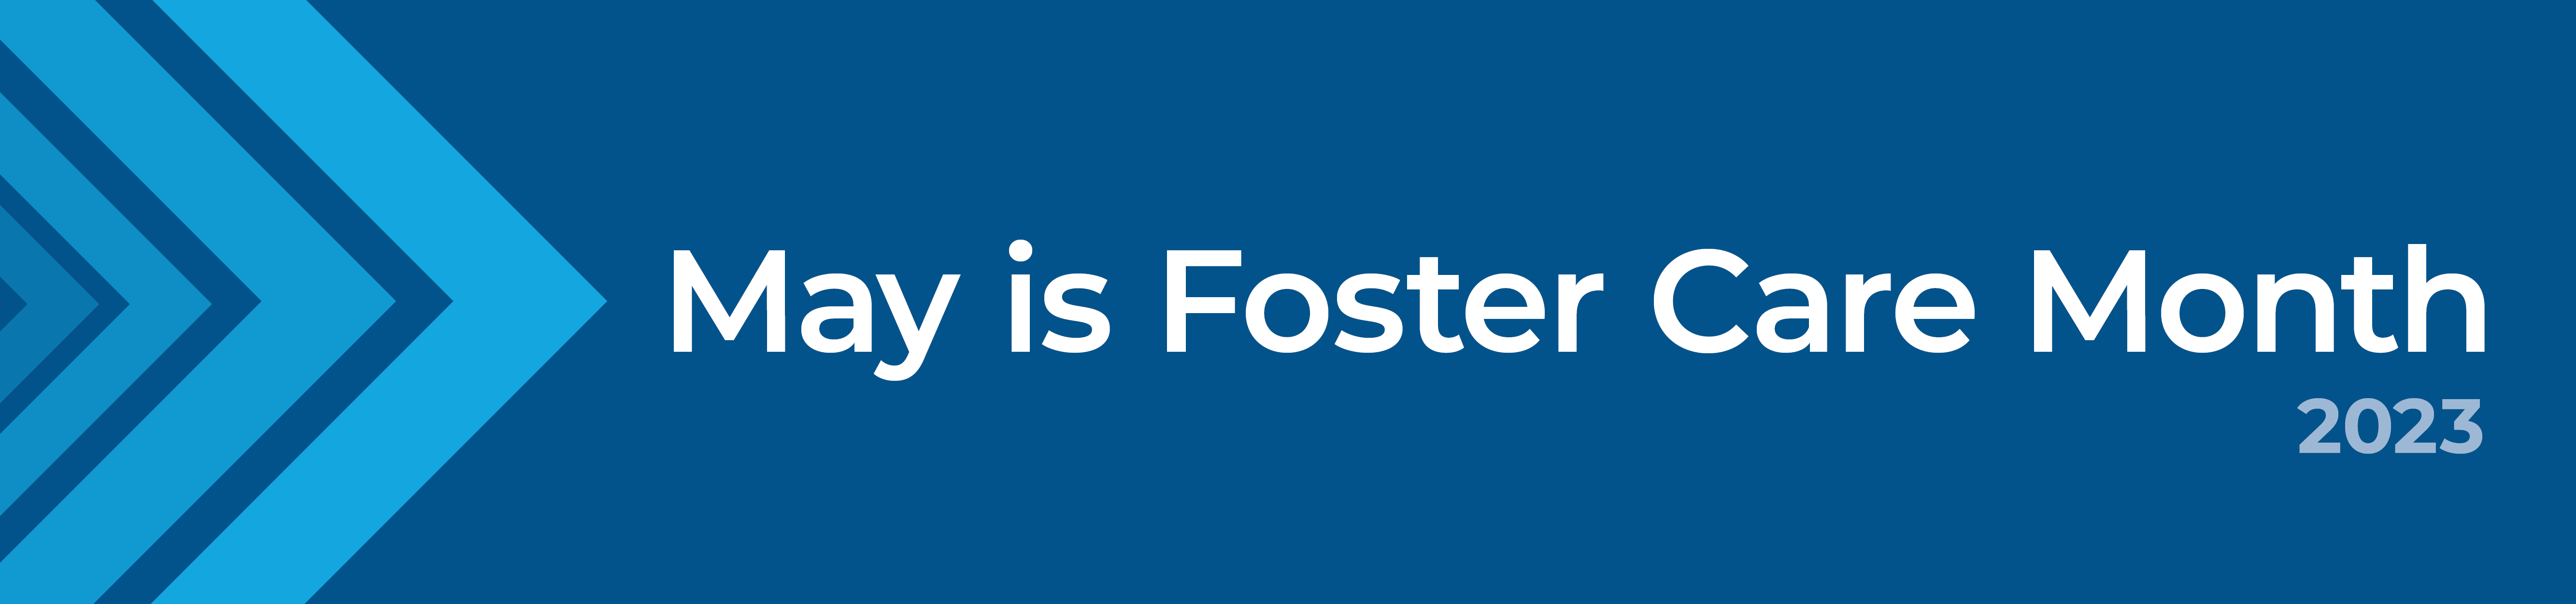 foster care month 2022 banner